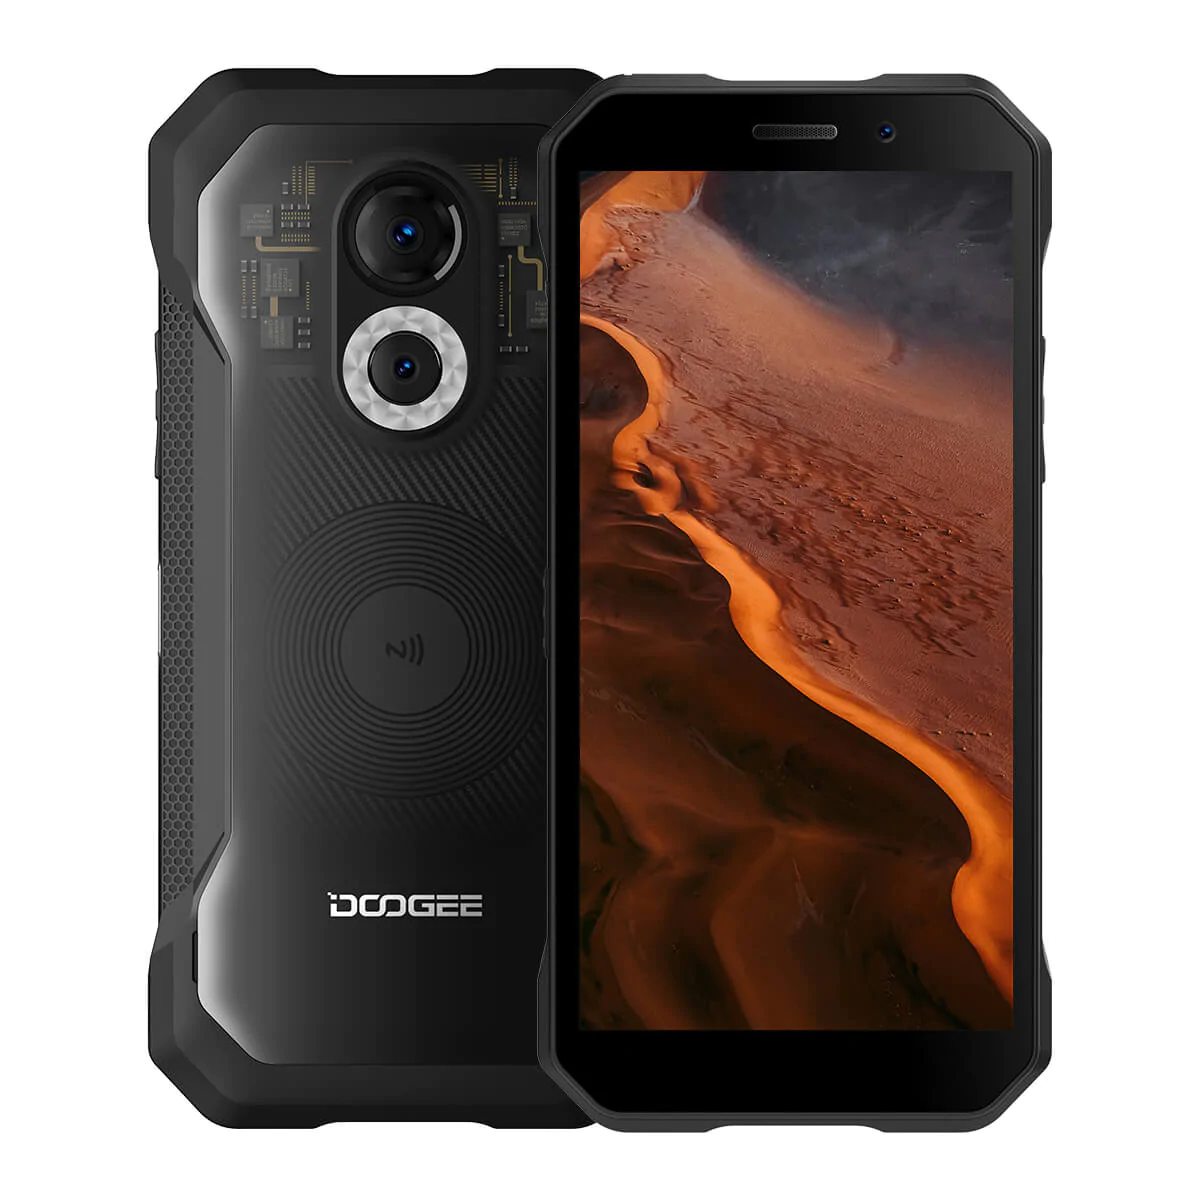 DOOGEE S61 Pro Specifications & Price in Nigeria Nigeriantech.com.ng